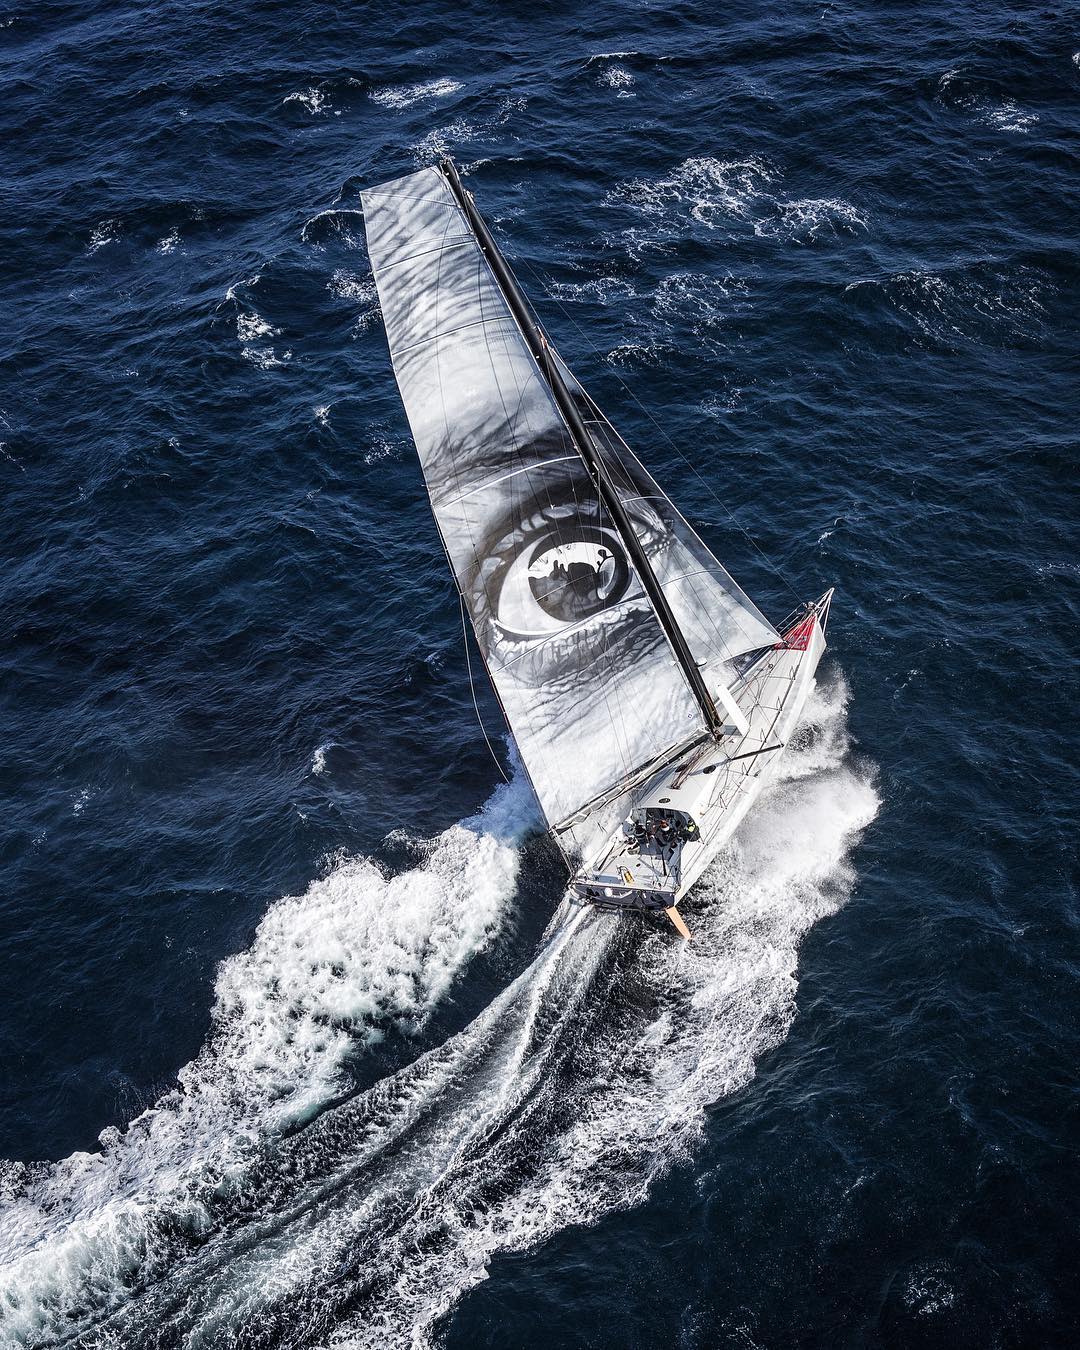 The Vivo a beira yacht with JR's image on its sails. Photograph by Benoit Stichelbaut